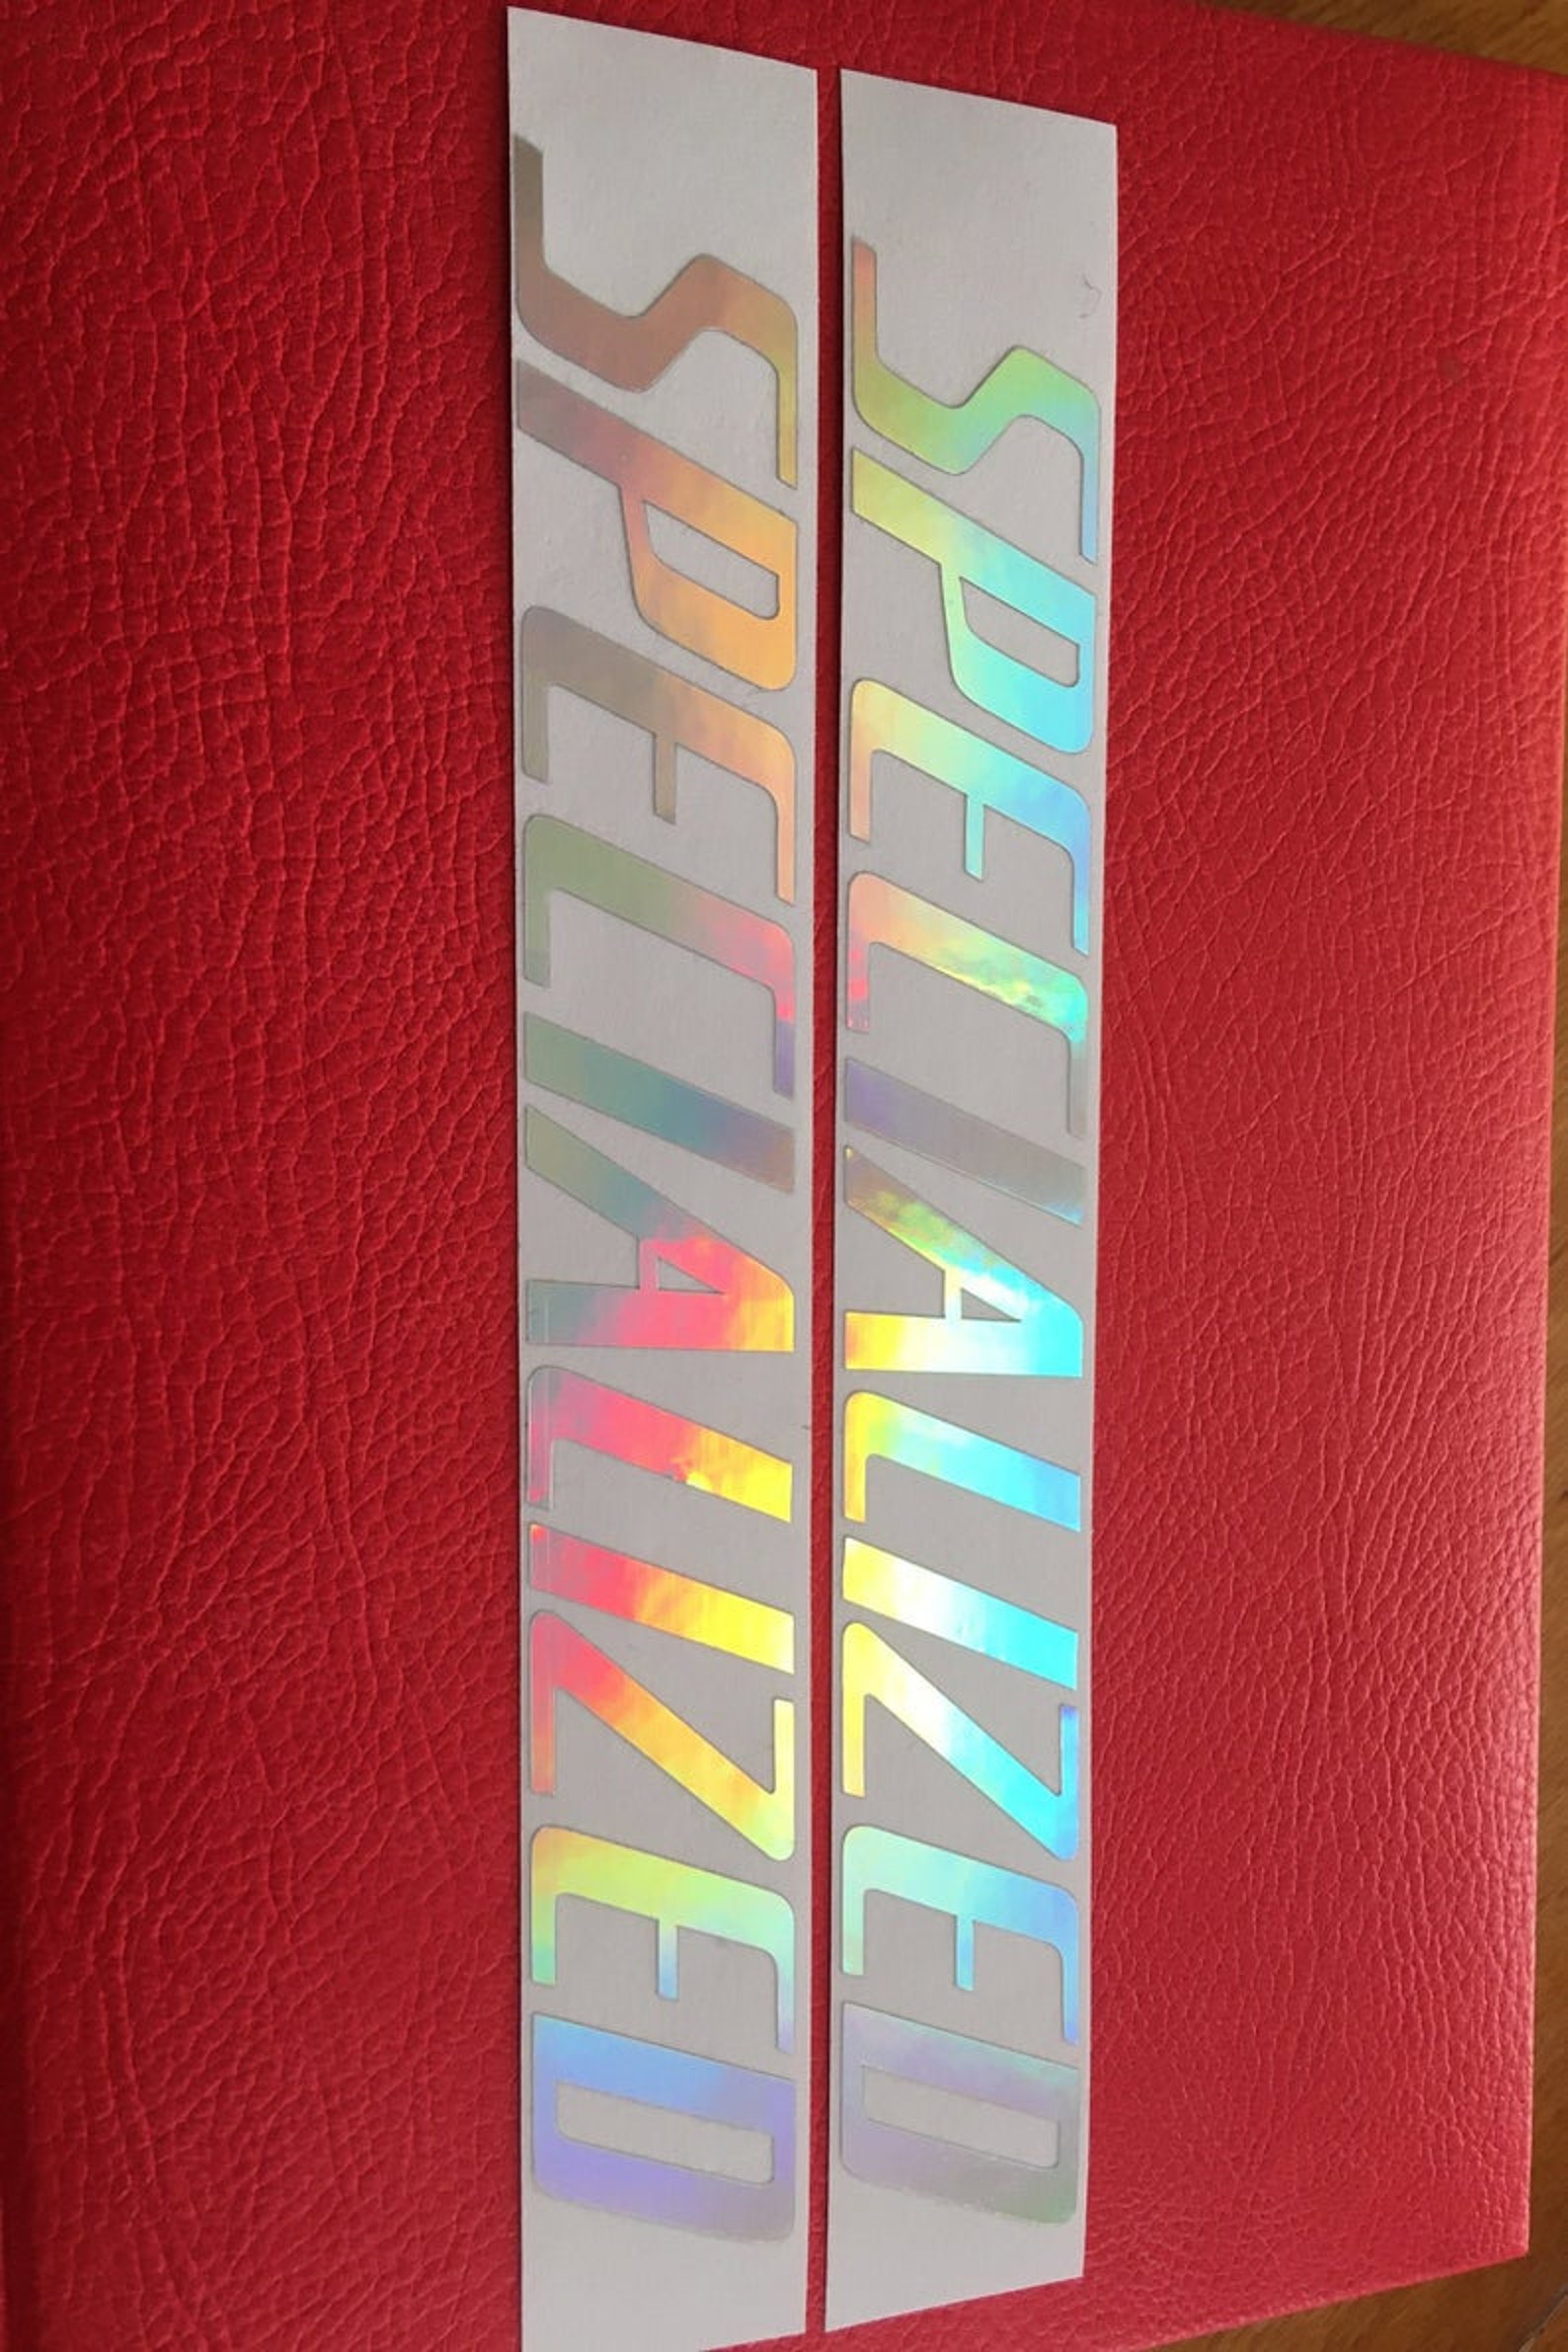 Specialized 2x decals stickers holographic iridescent chrome | Etsy